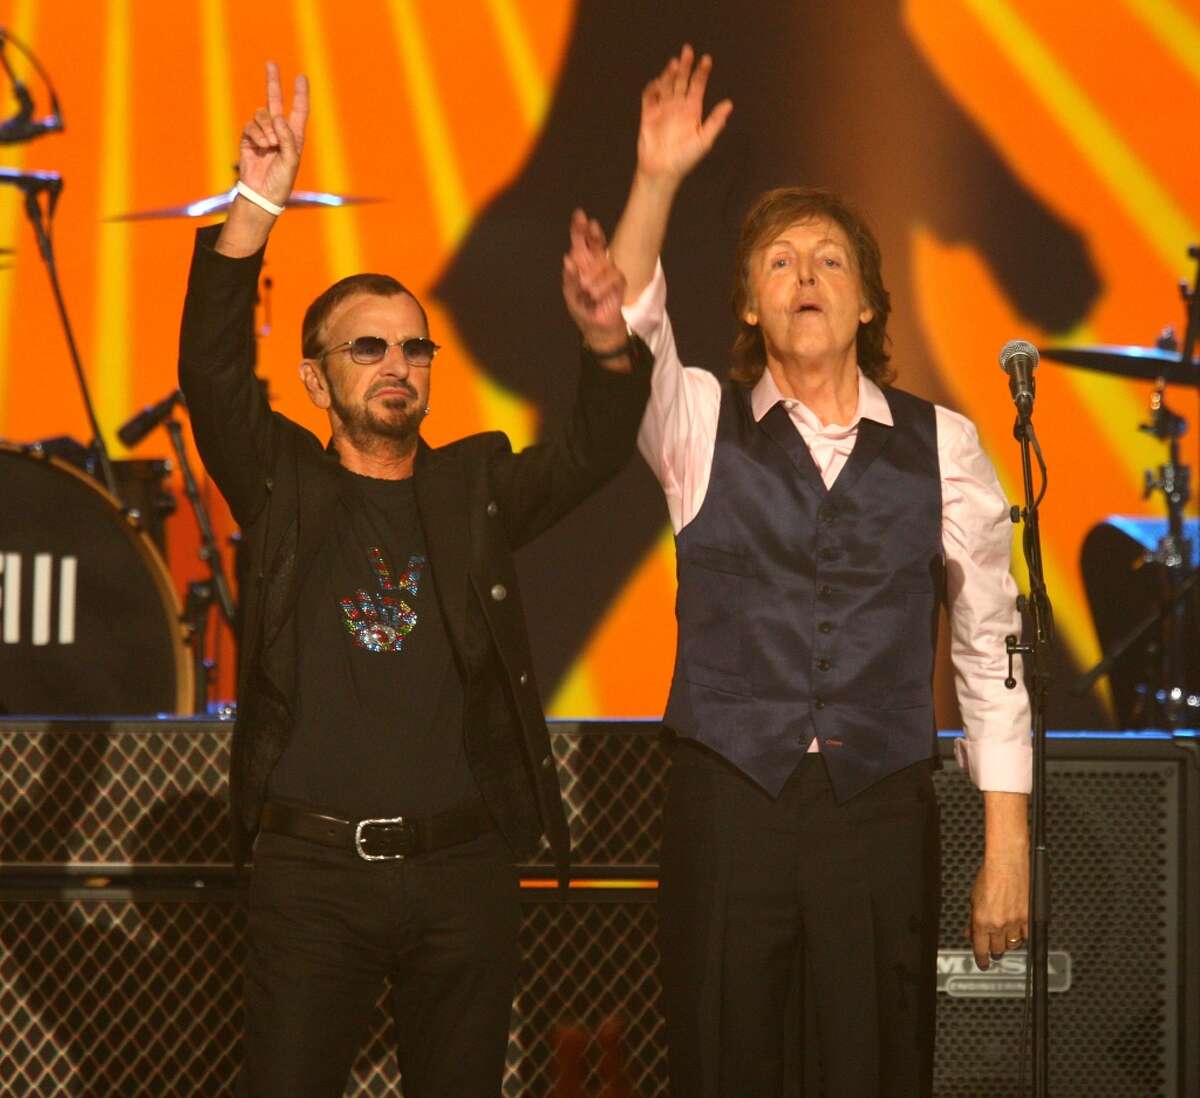 Ringo Starr and Paul McCartney perform at The Night that Changed America: A Grammy Salute to the Beatles, on Monday, Jan. 27, 2014, in Los Angeles.